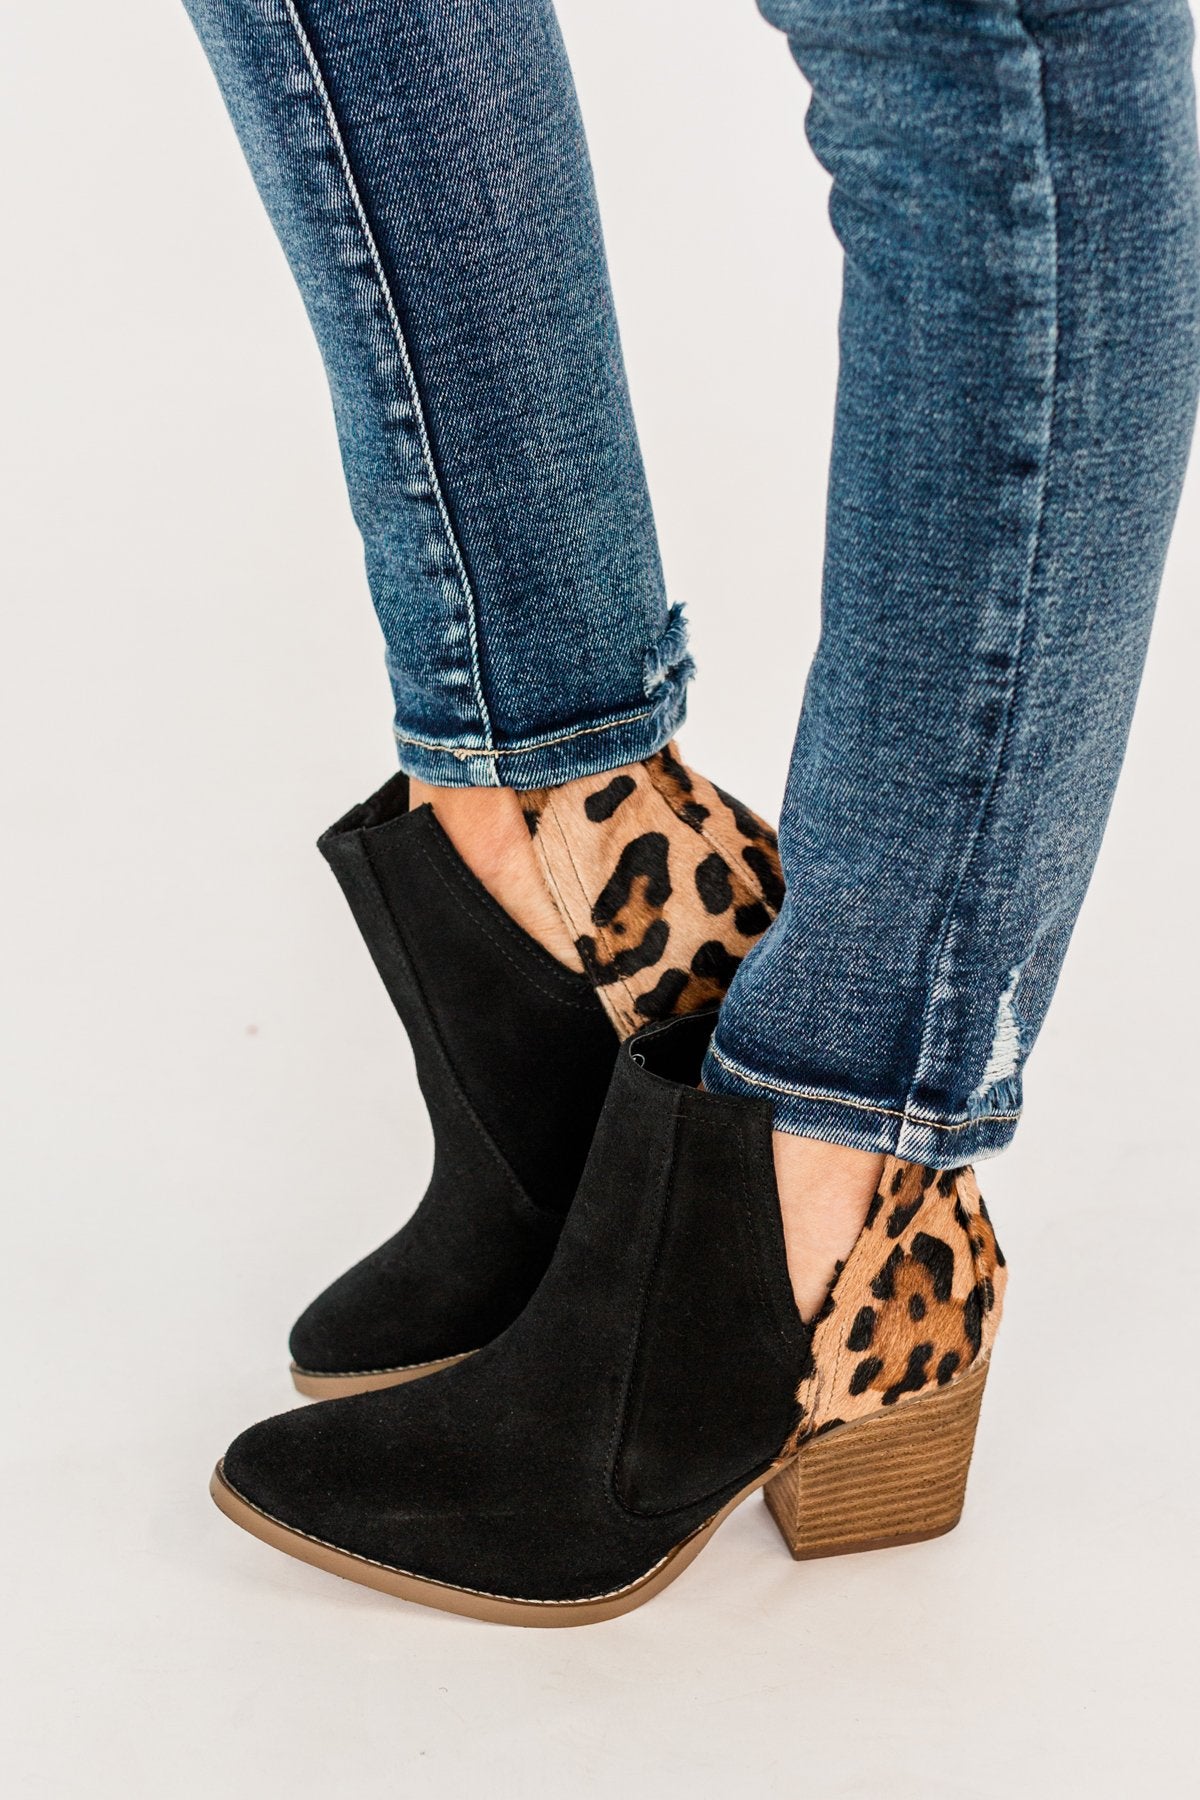 Naughty Monkey Camilyn Booties- Black and Leopard photo